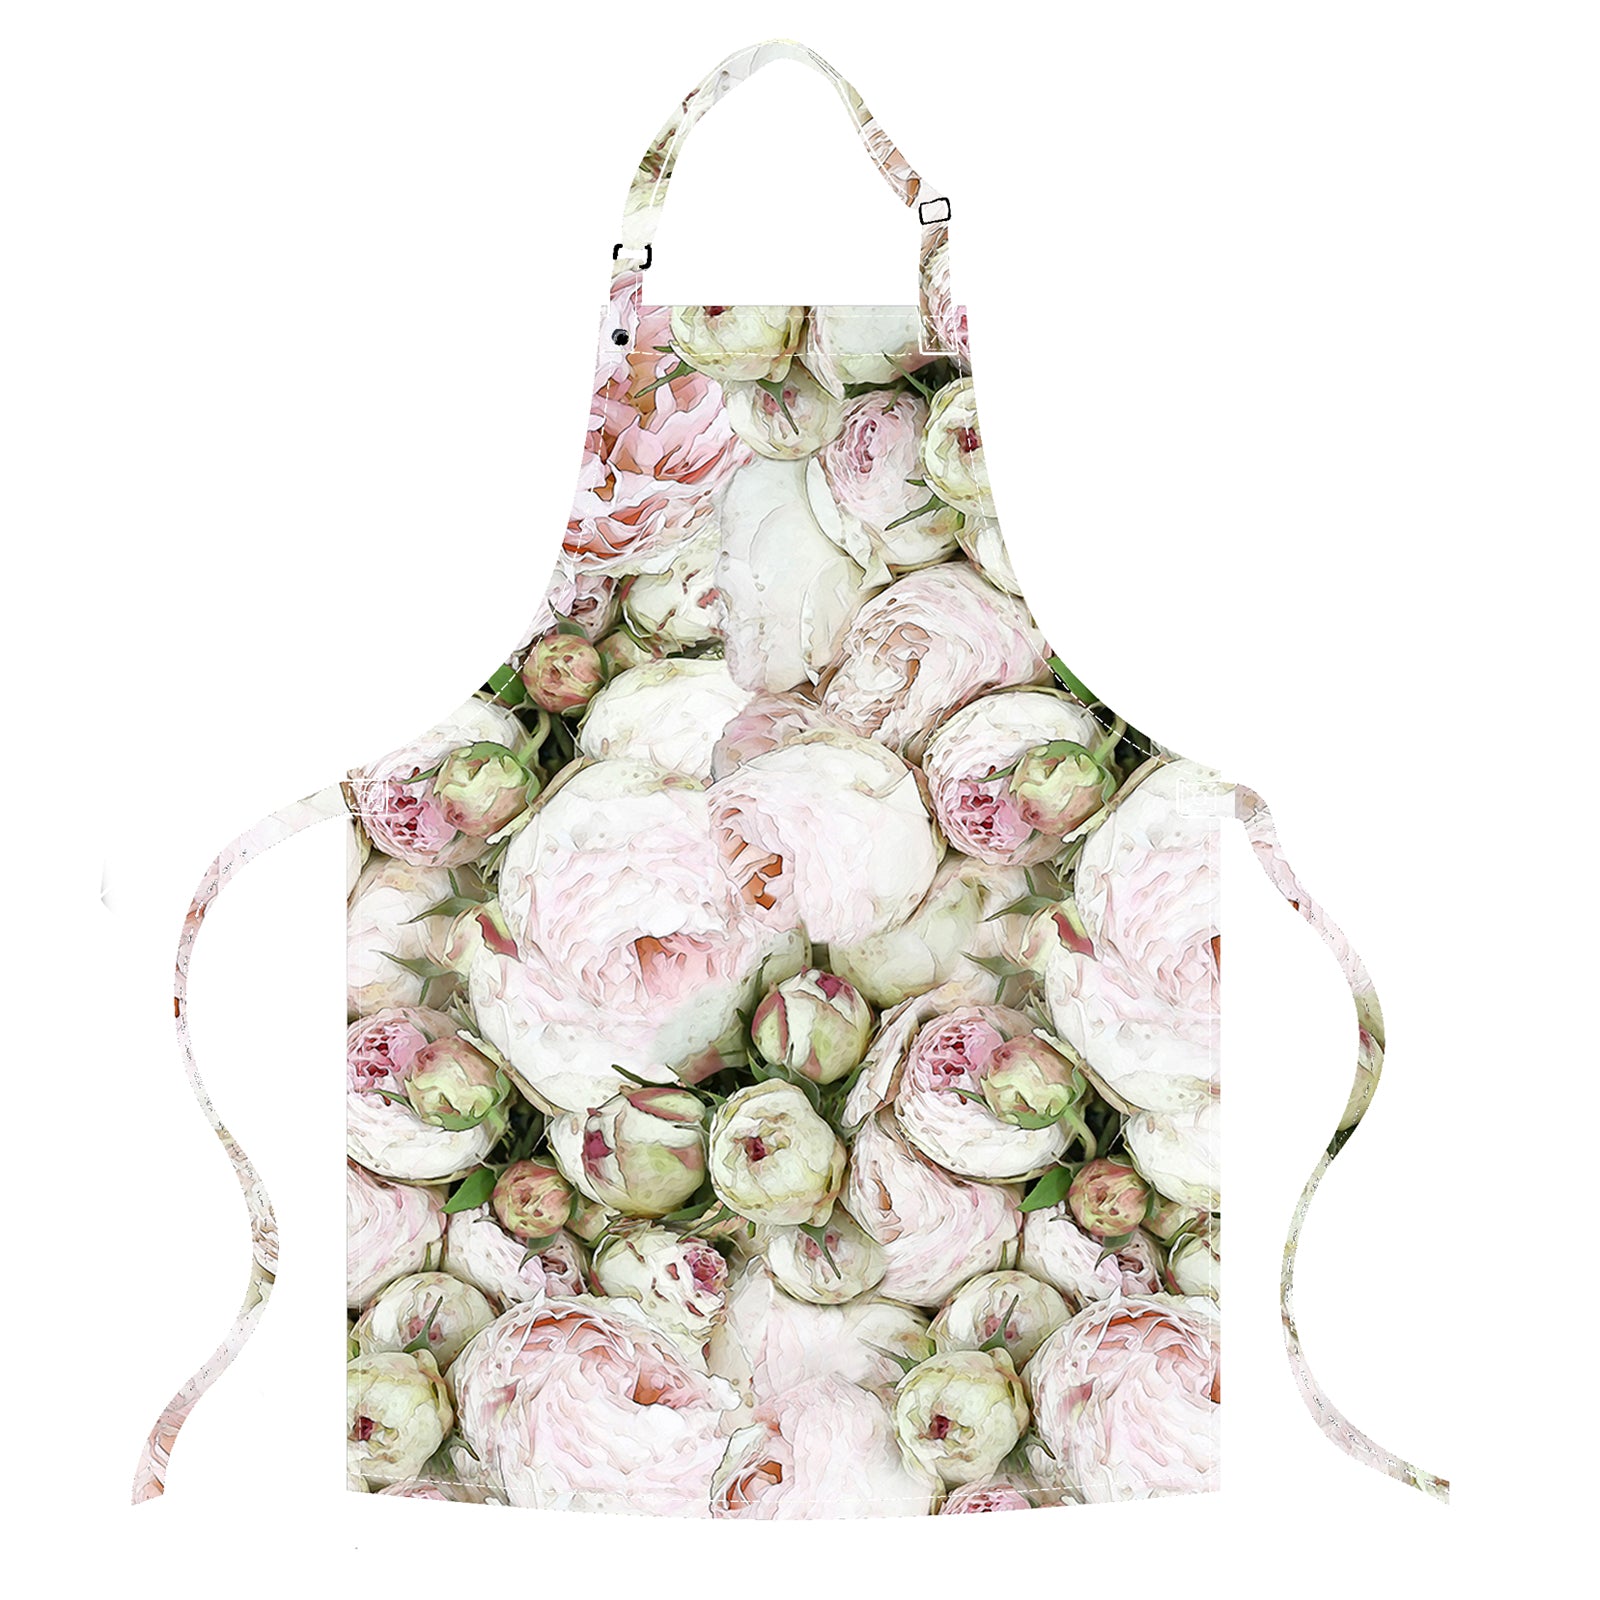 Apron in Peony Pink